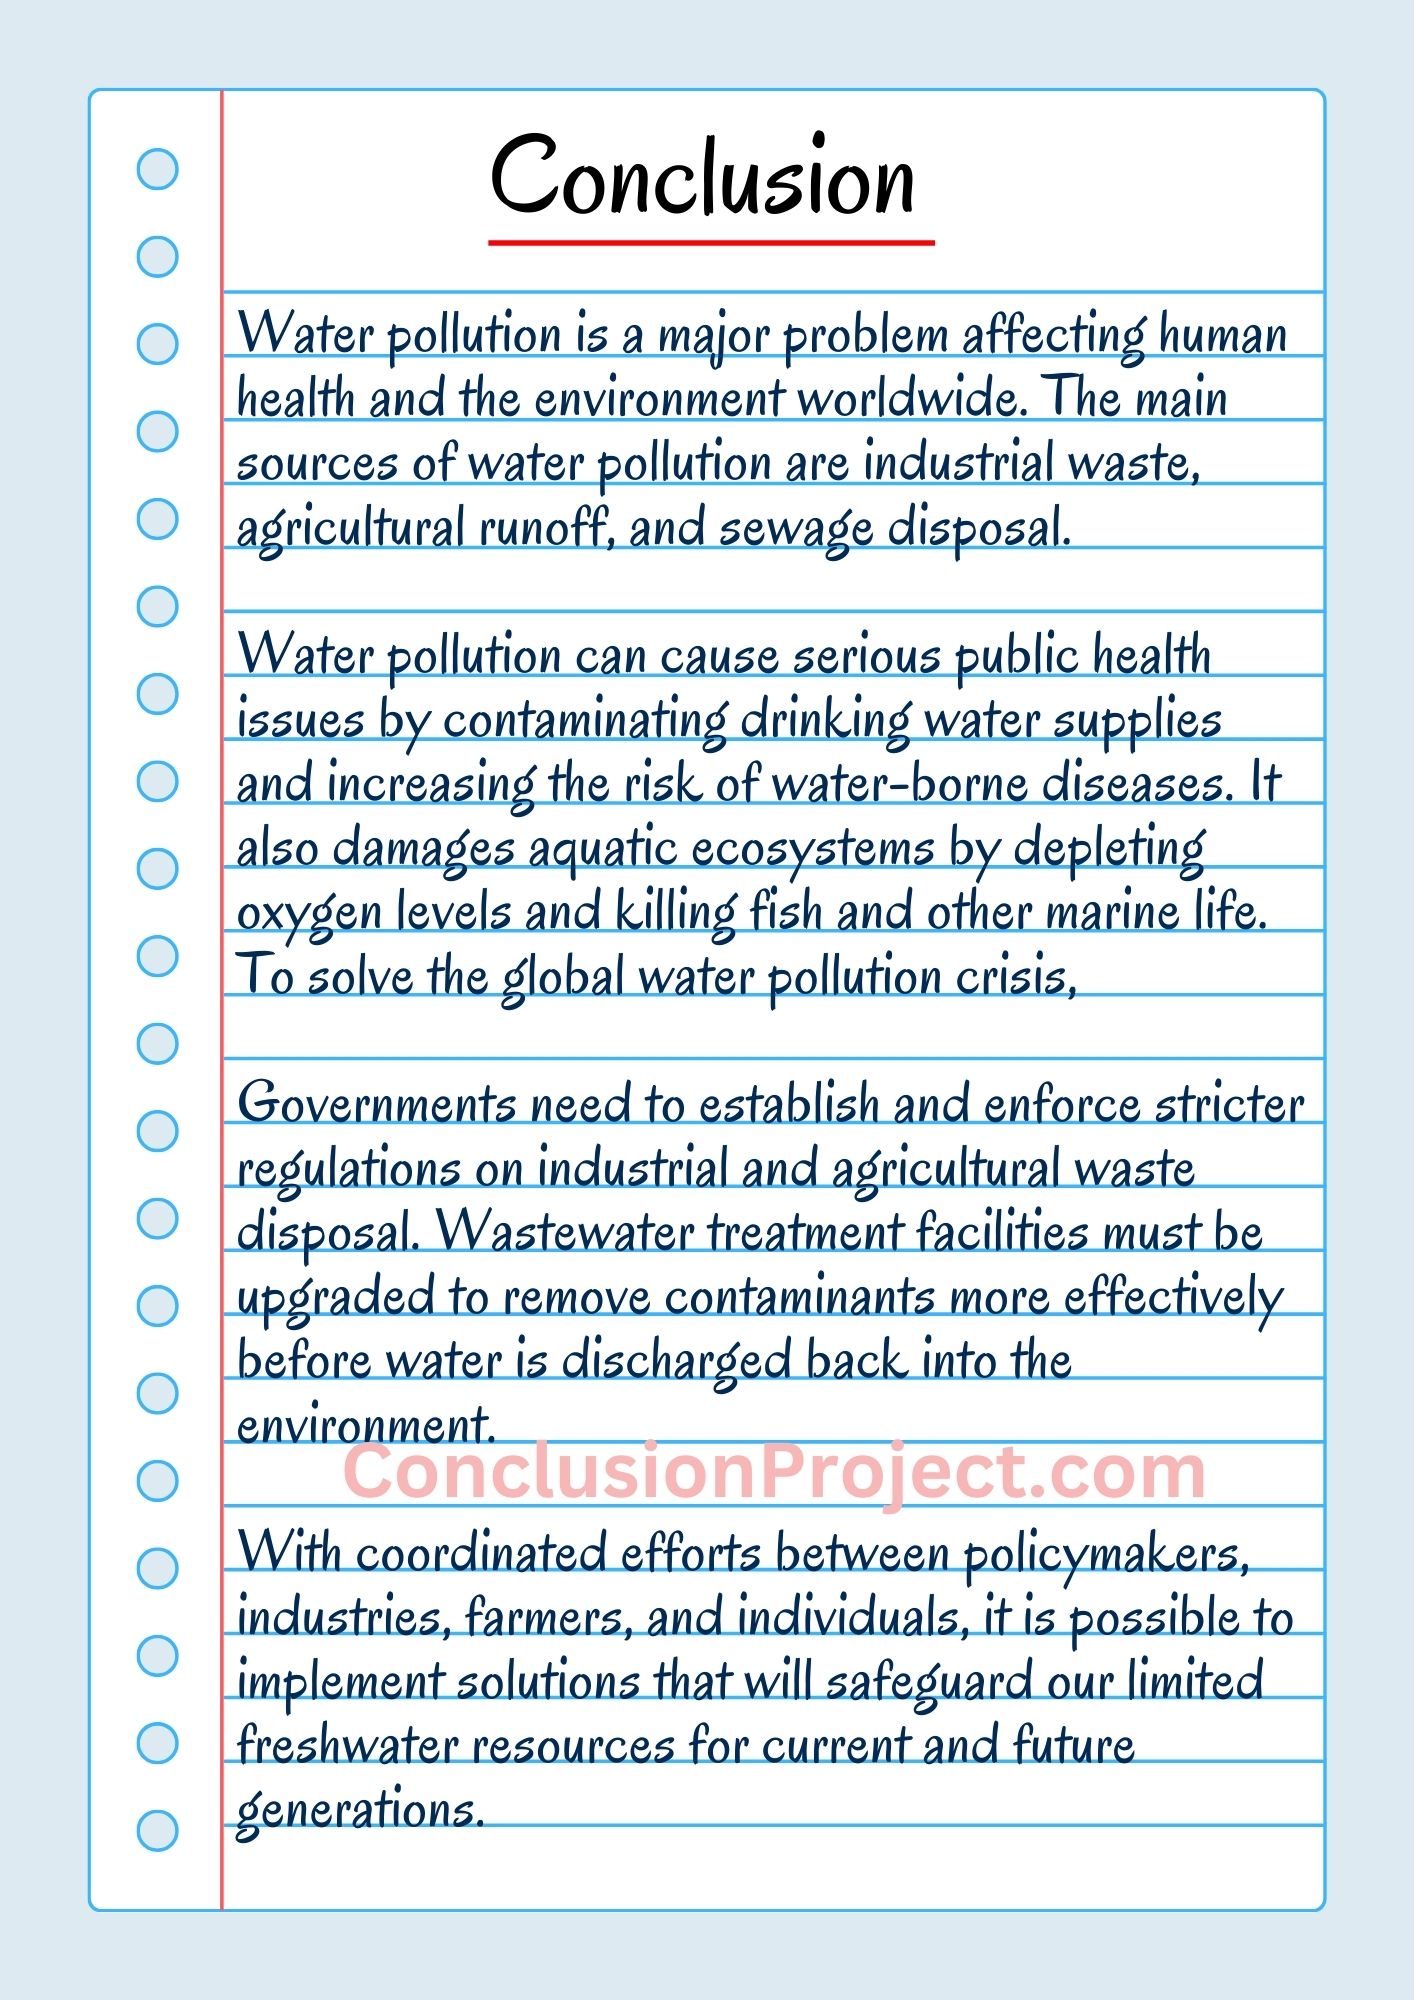 conclusion of water pollution